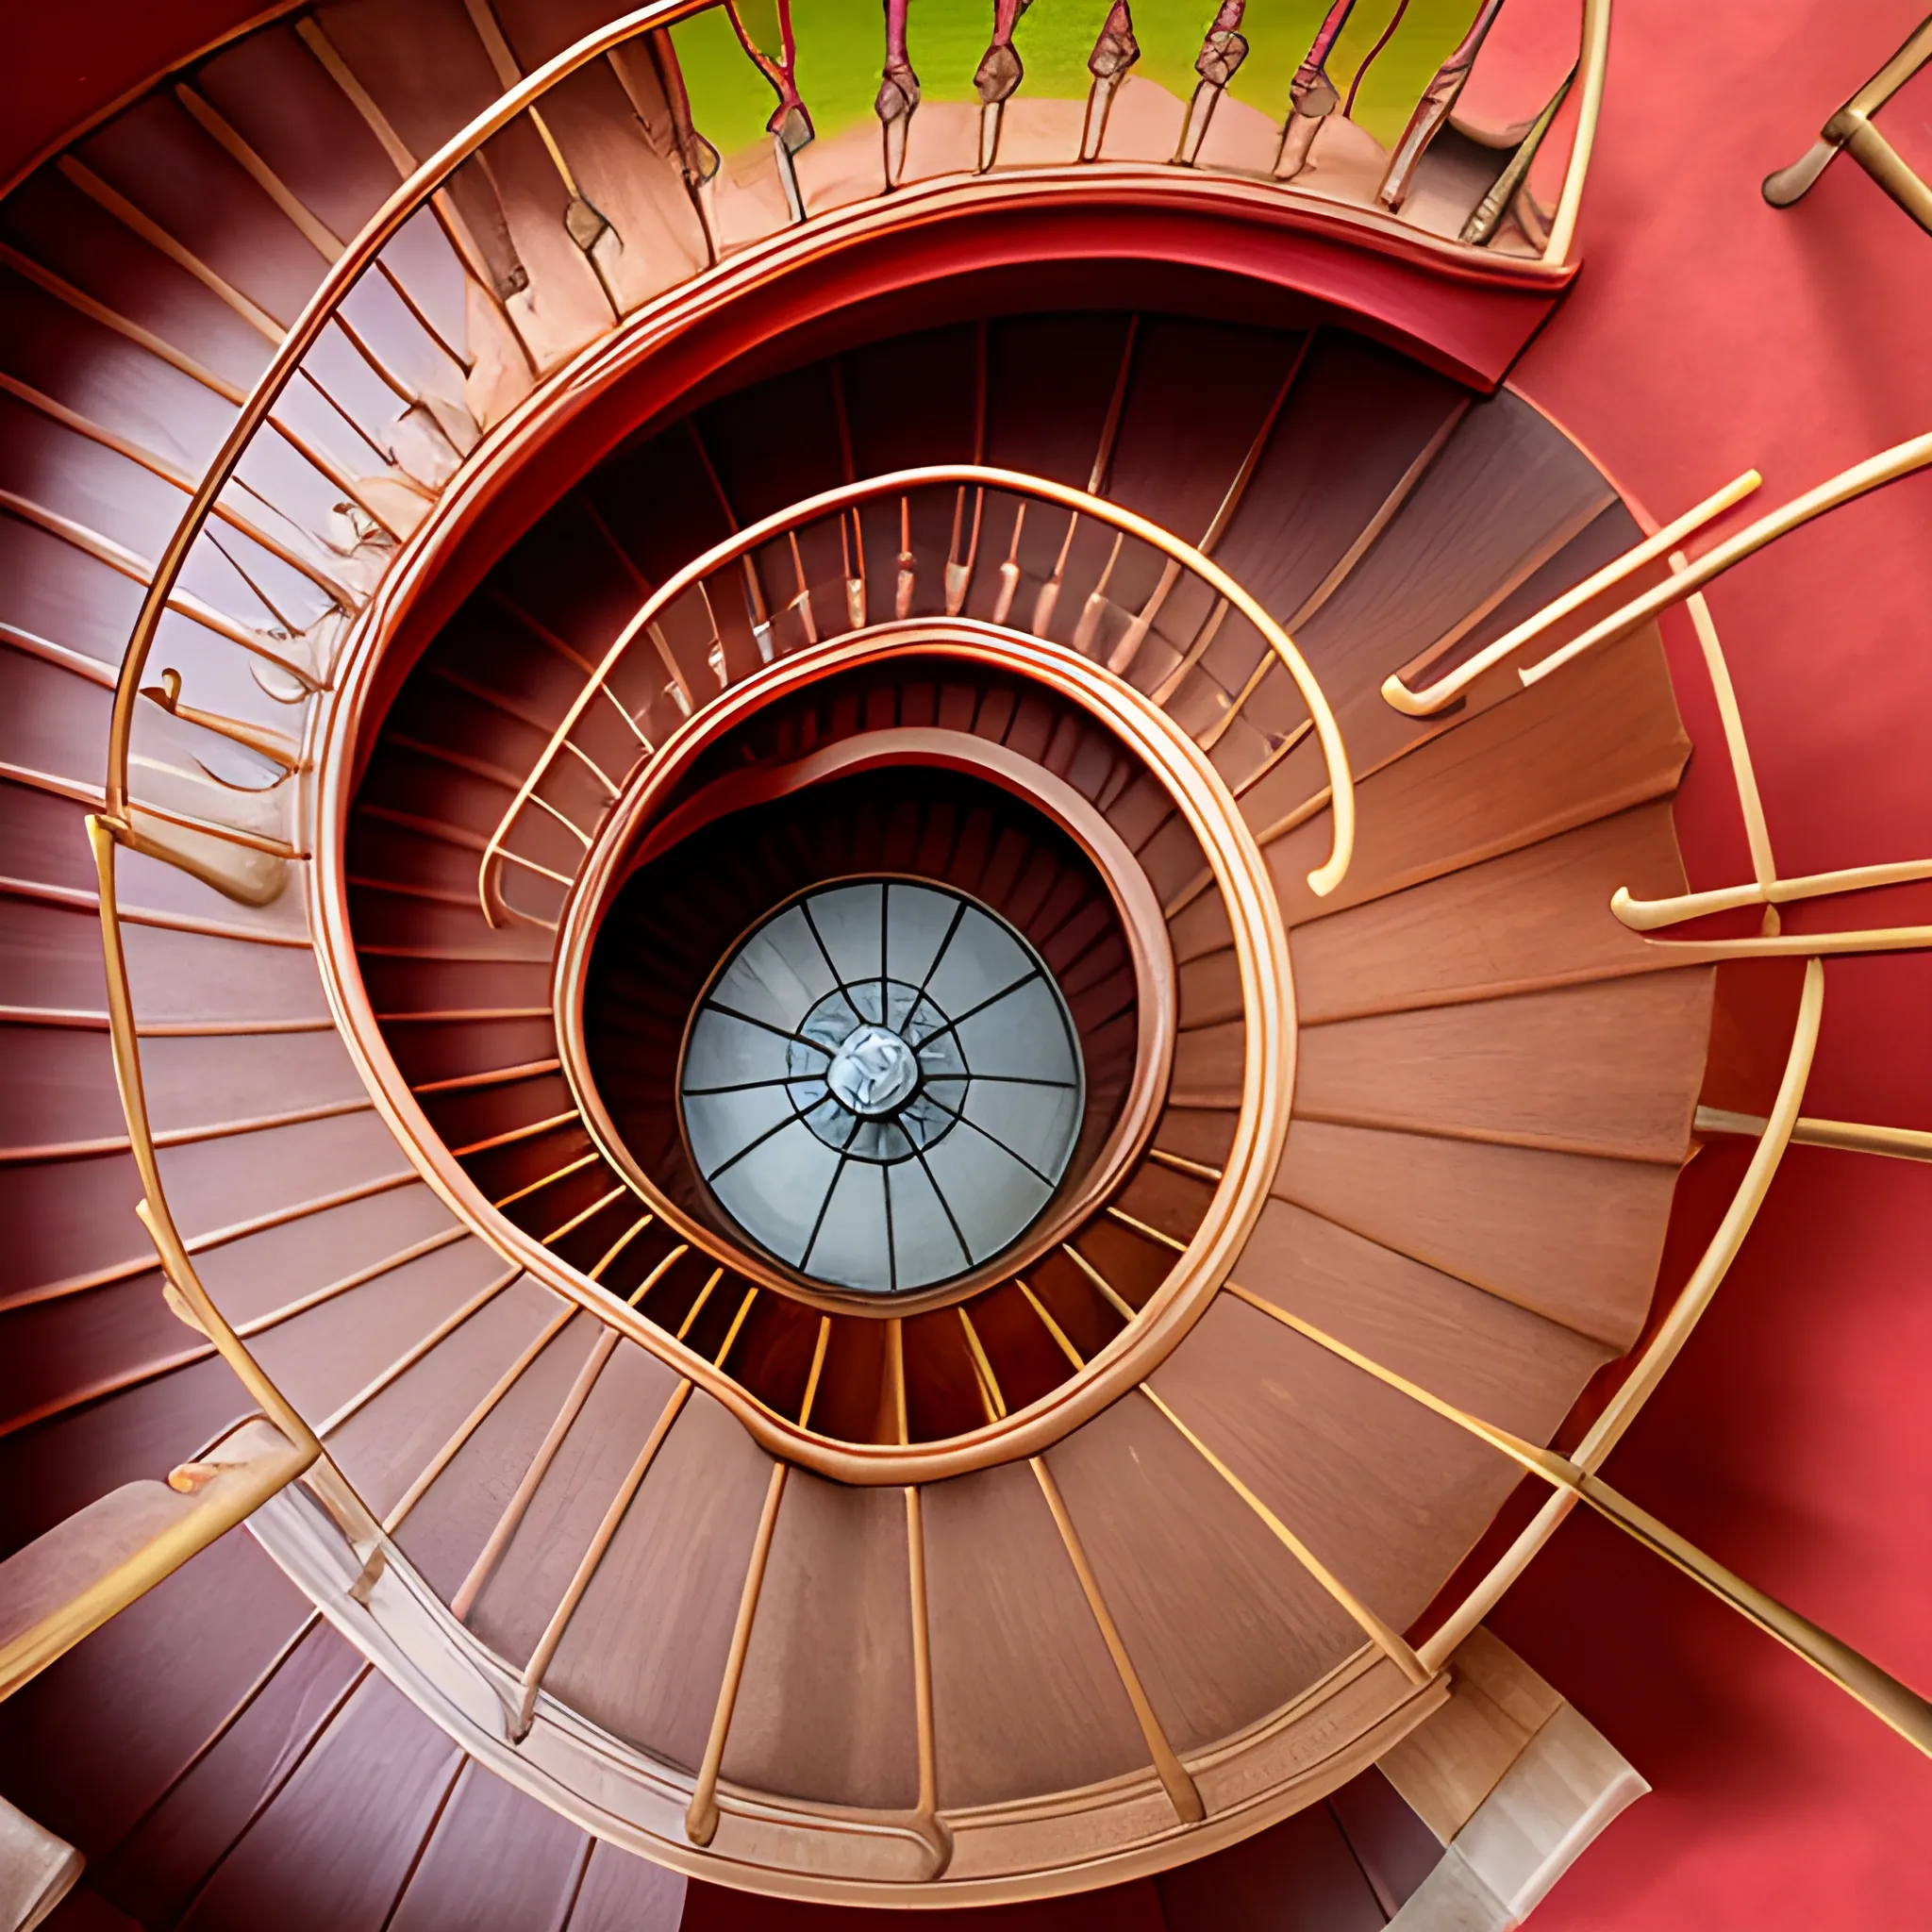  castle spiral staircase, aerial view, red background